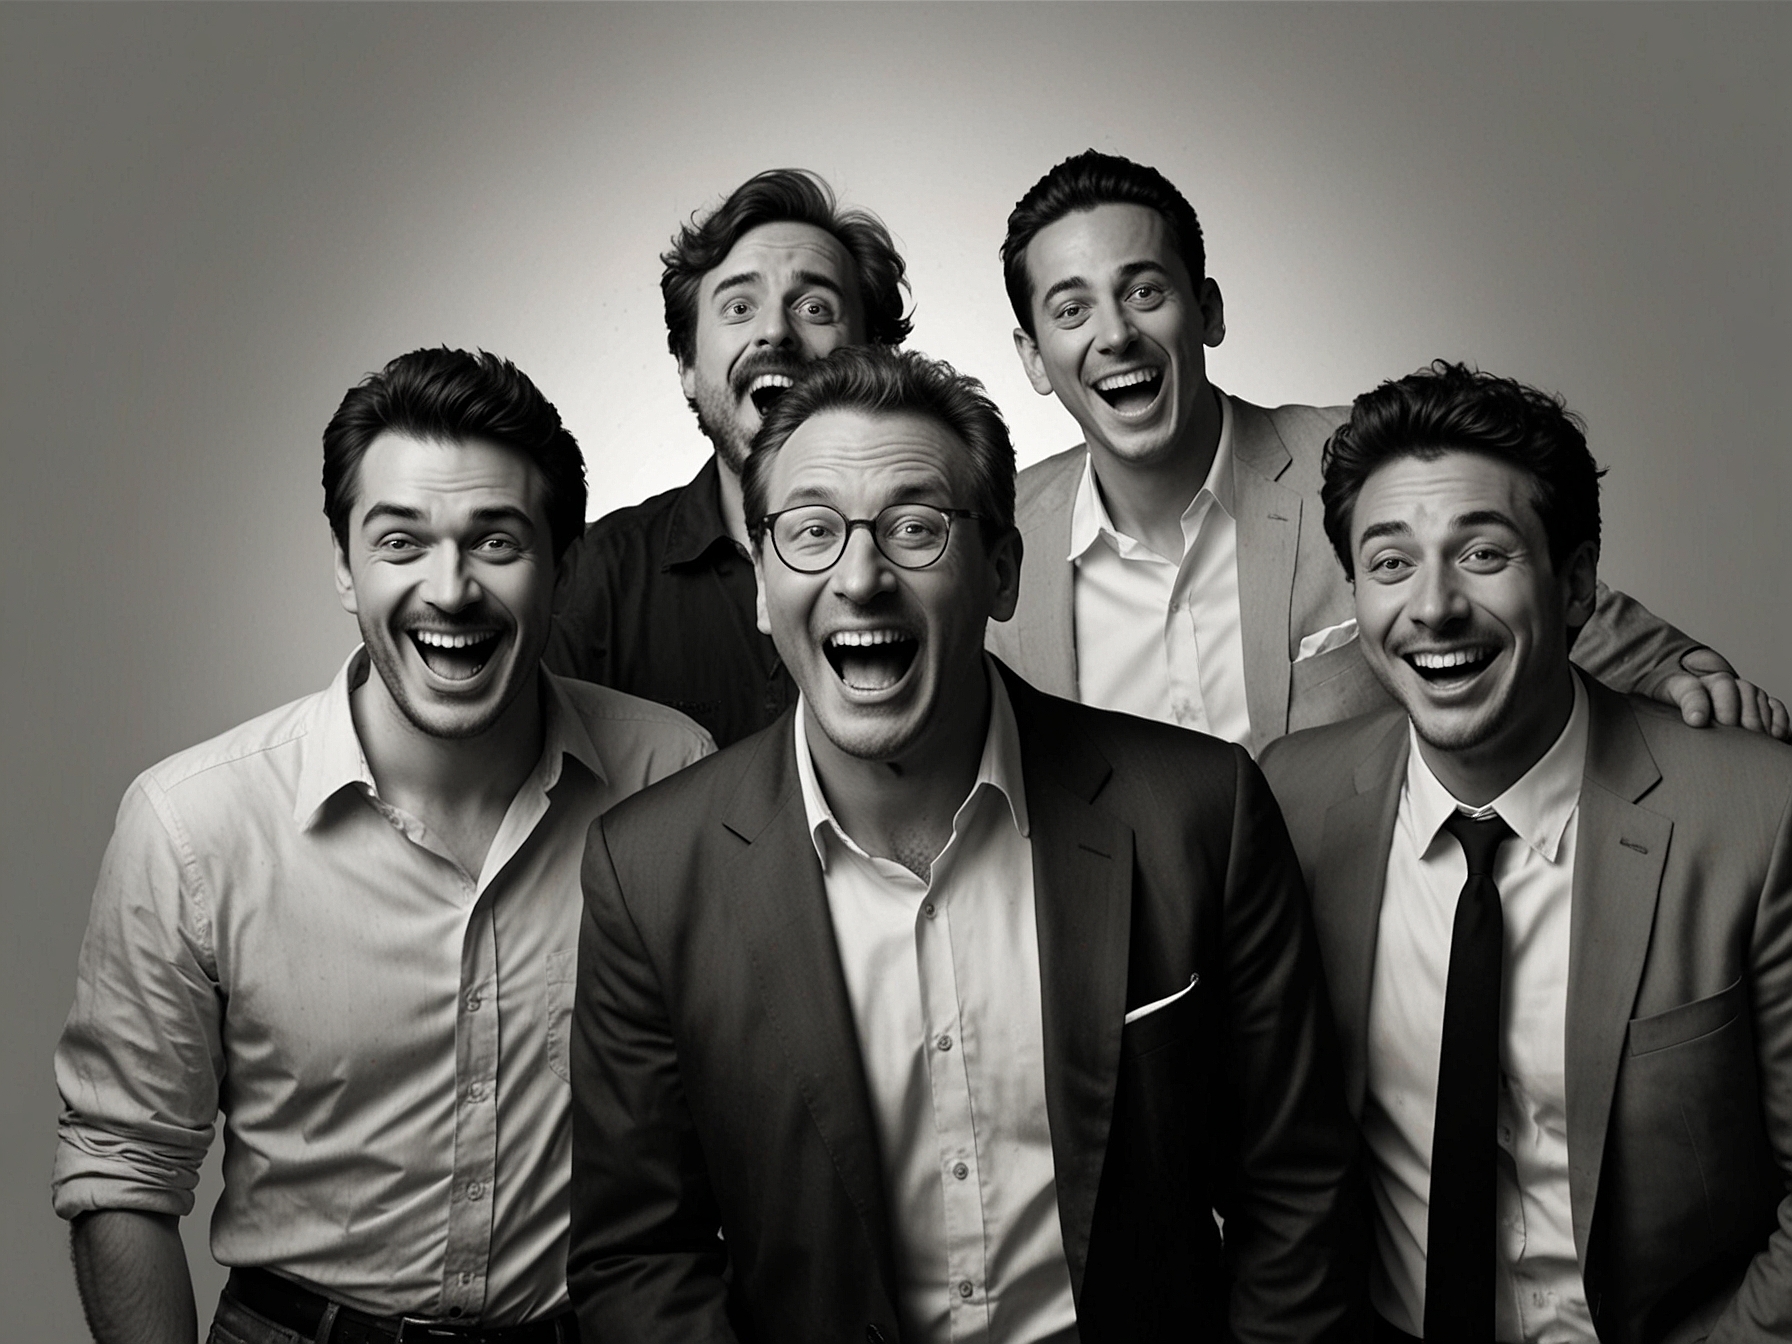 A group of comedians in the LOL: Last One Laughing Italy studio, each trying to keep a straight face while another performs a hilarious act to make them laugh.